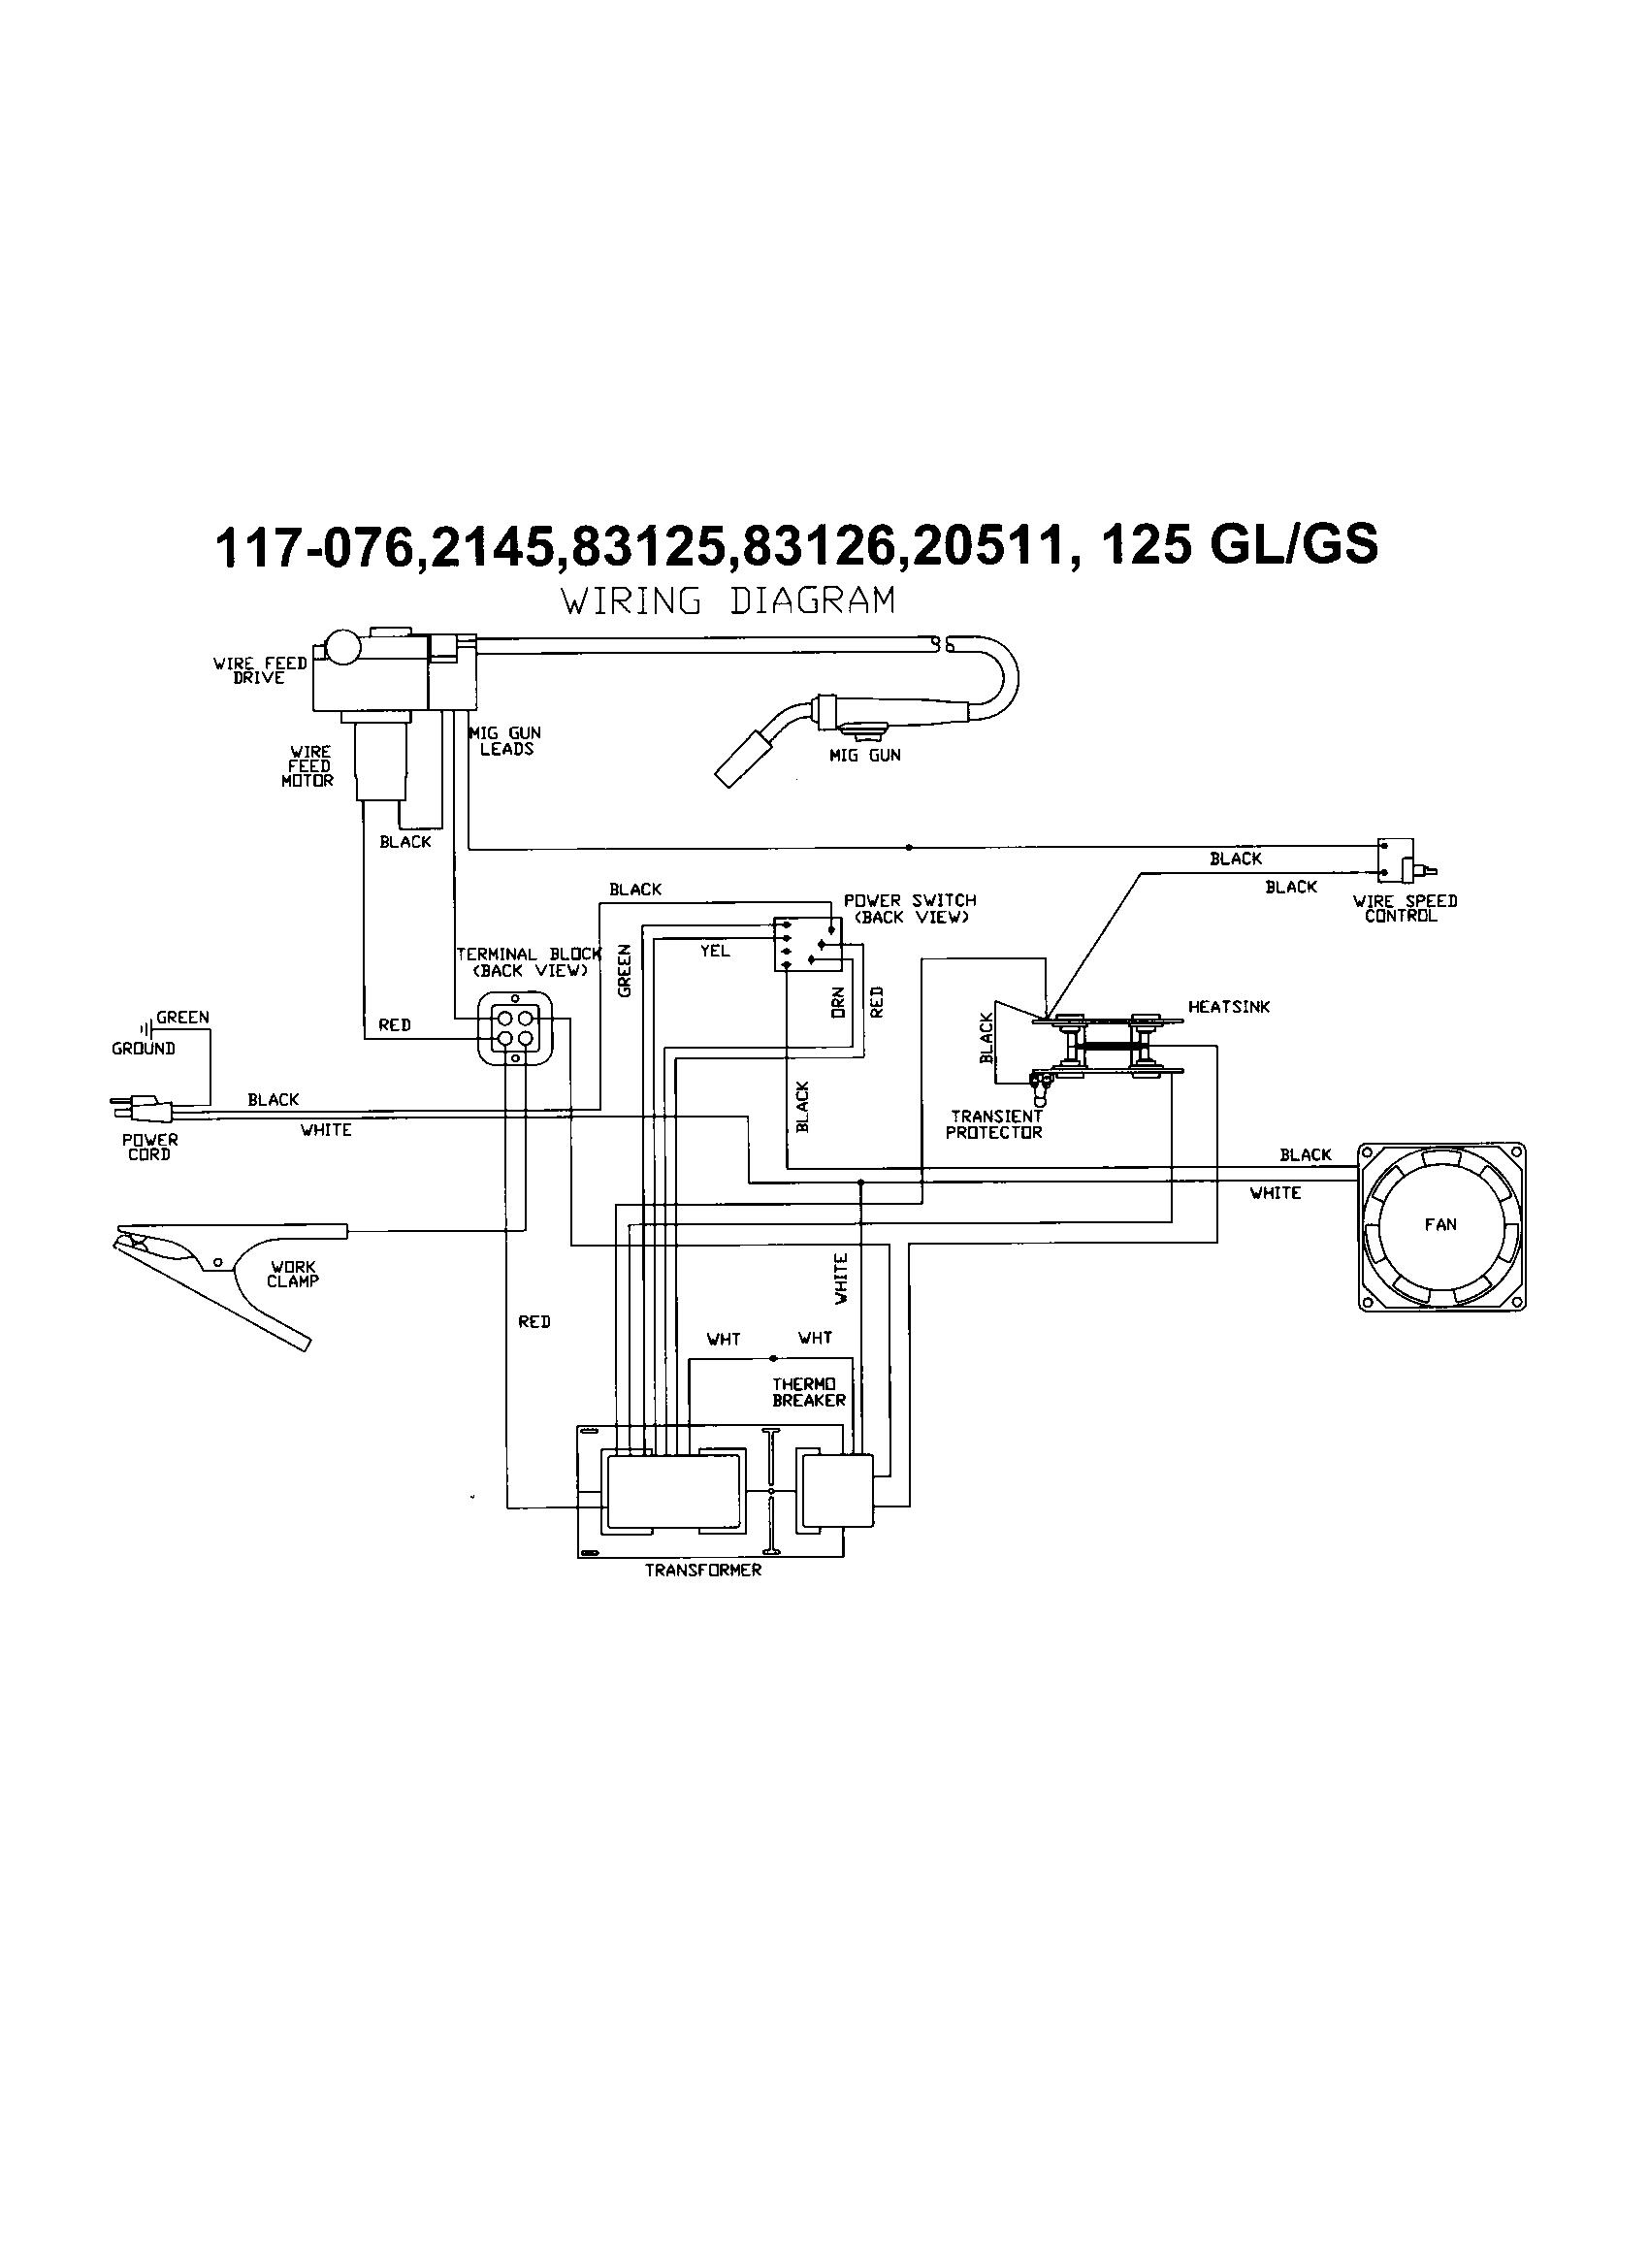 Wiring Diagram For Lincoln Welding Machine | Wiring Diagram - Lincoln 225 Arc Welder Wiring Diagram